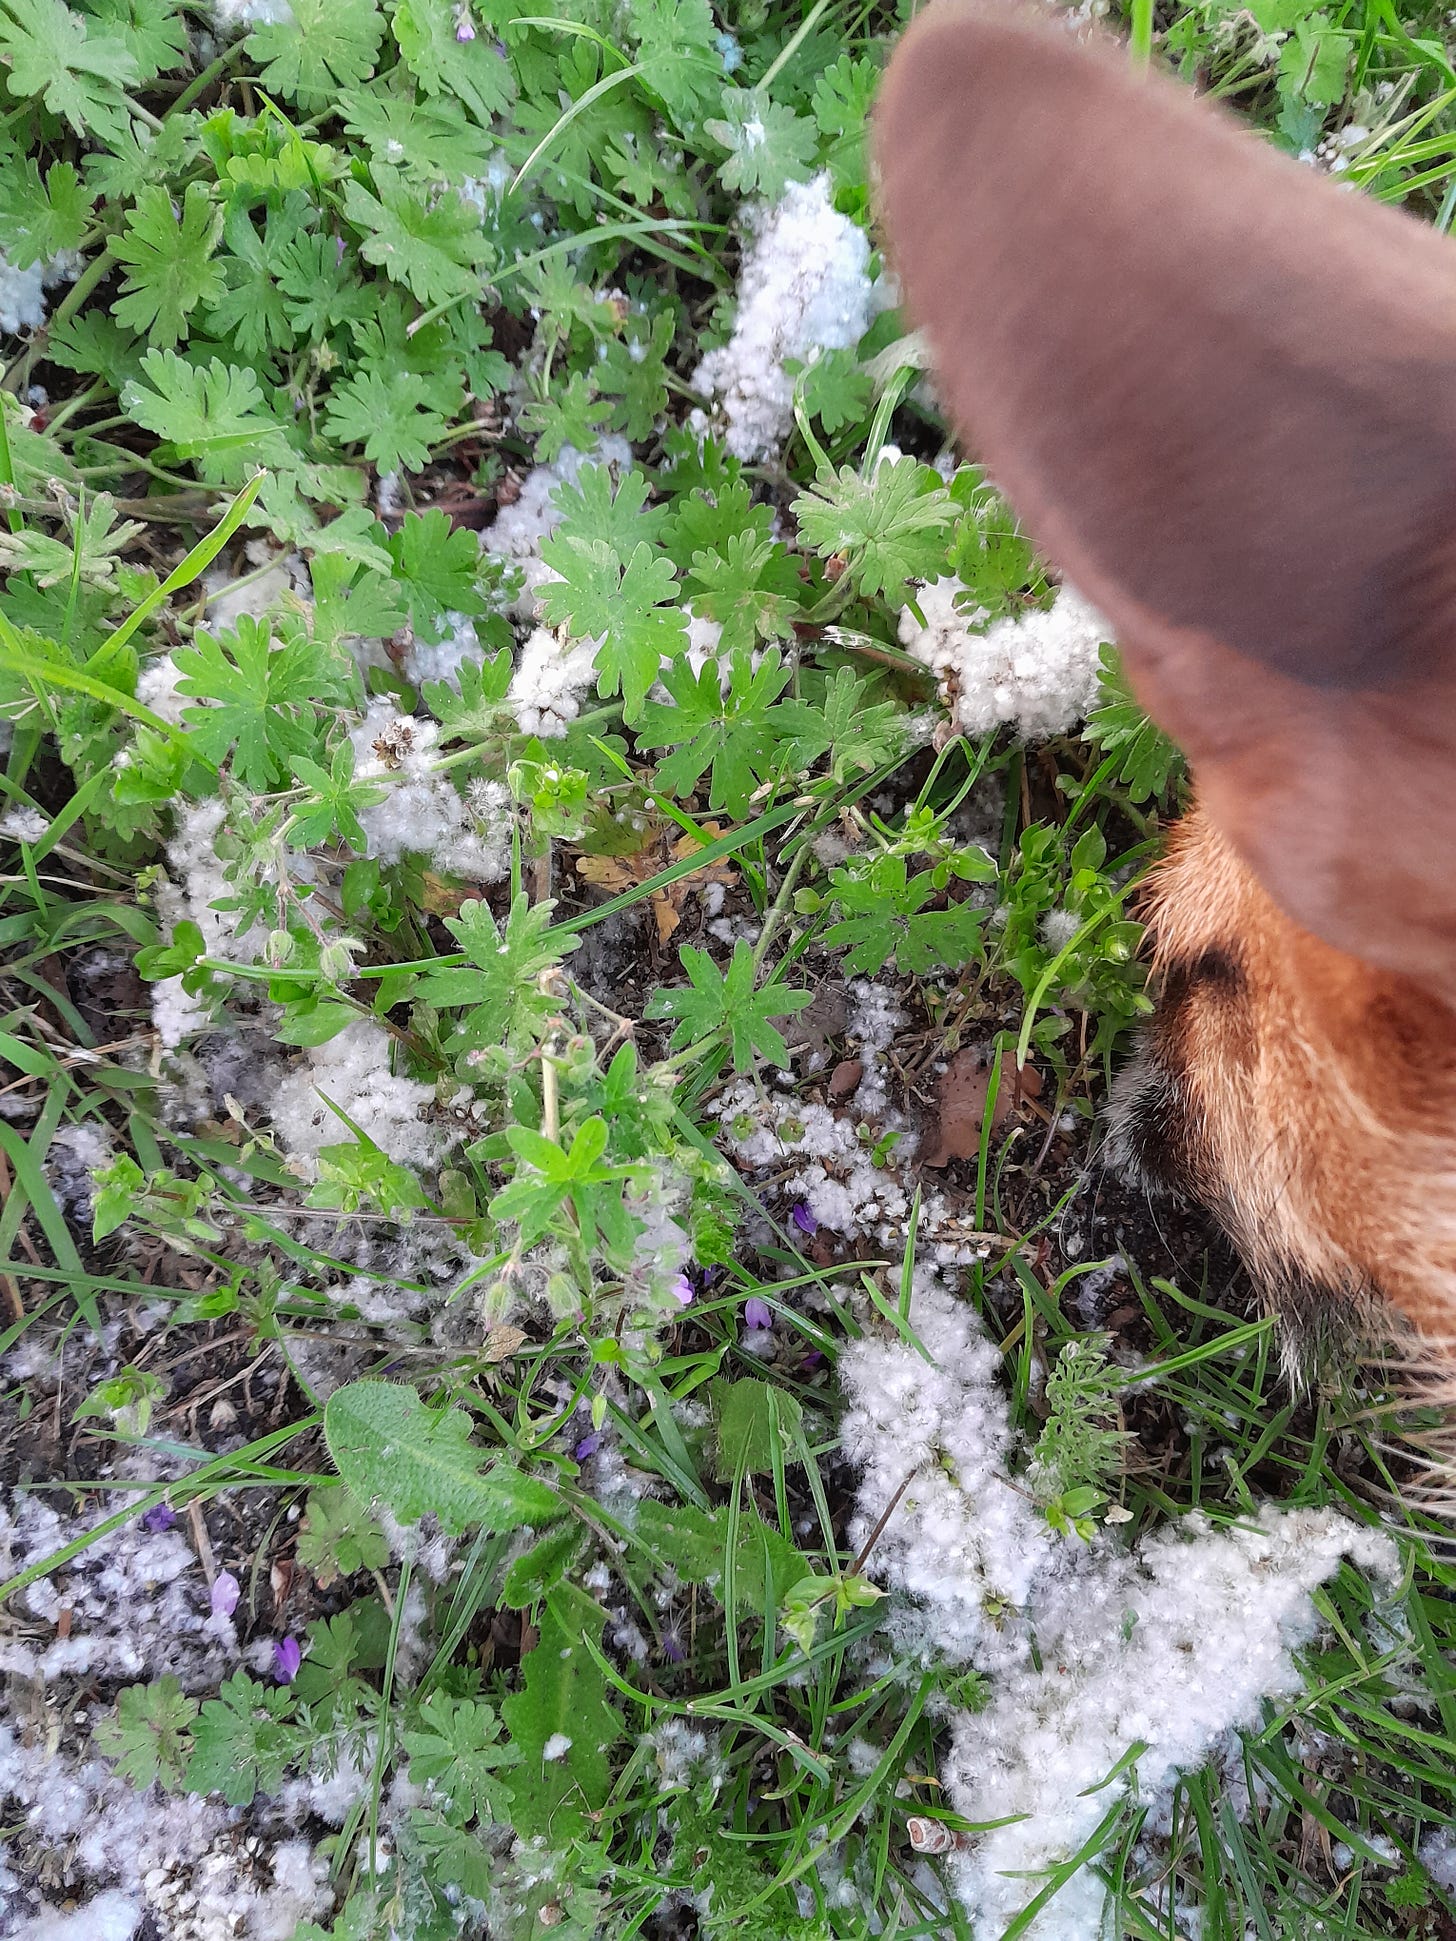 Fluffy white catkins on a bed of cranesbill. A small dog's ear and nose are in shot